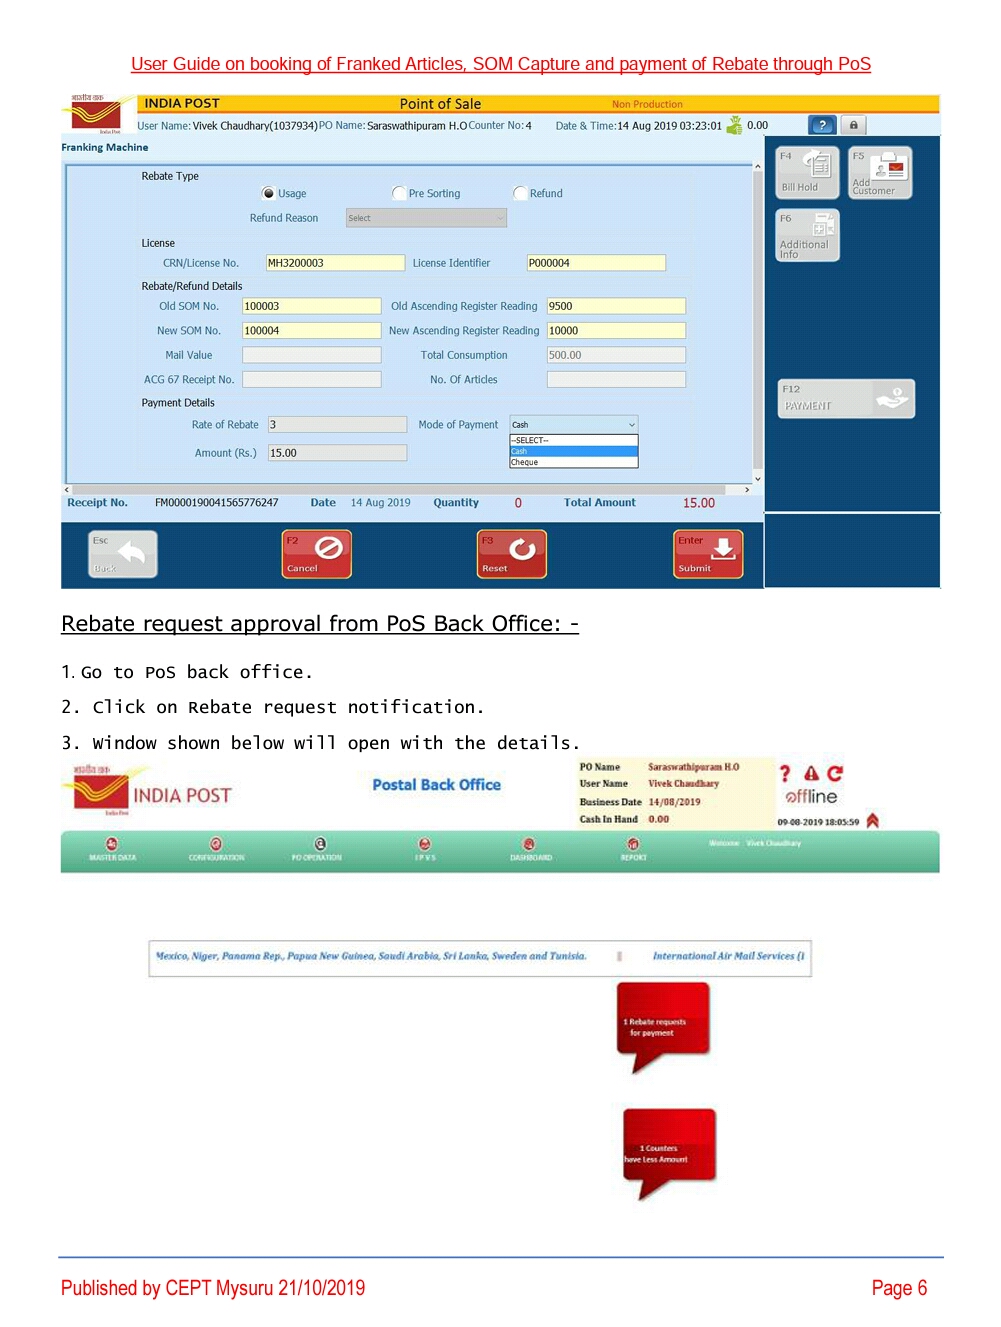 user-guide-on-booking-of-franked-articles-som-capture-and-payment-of